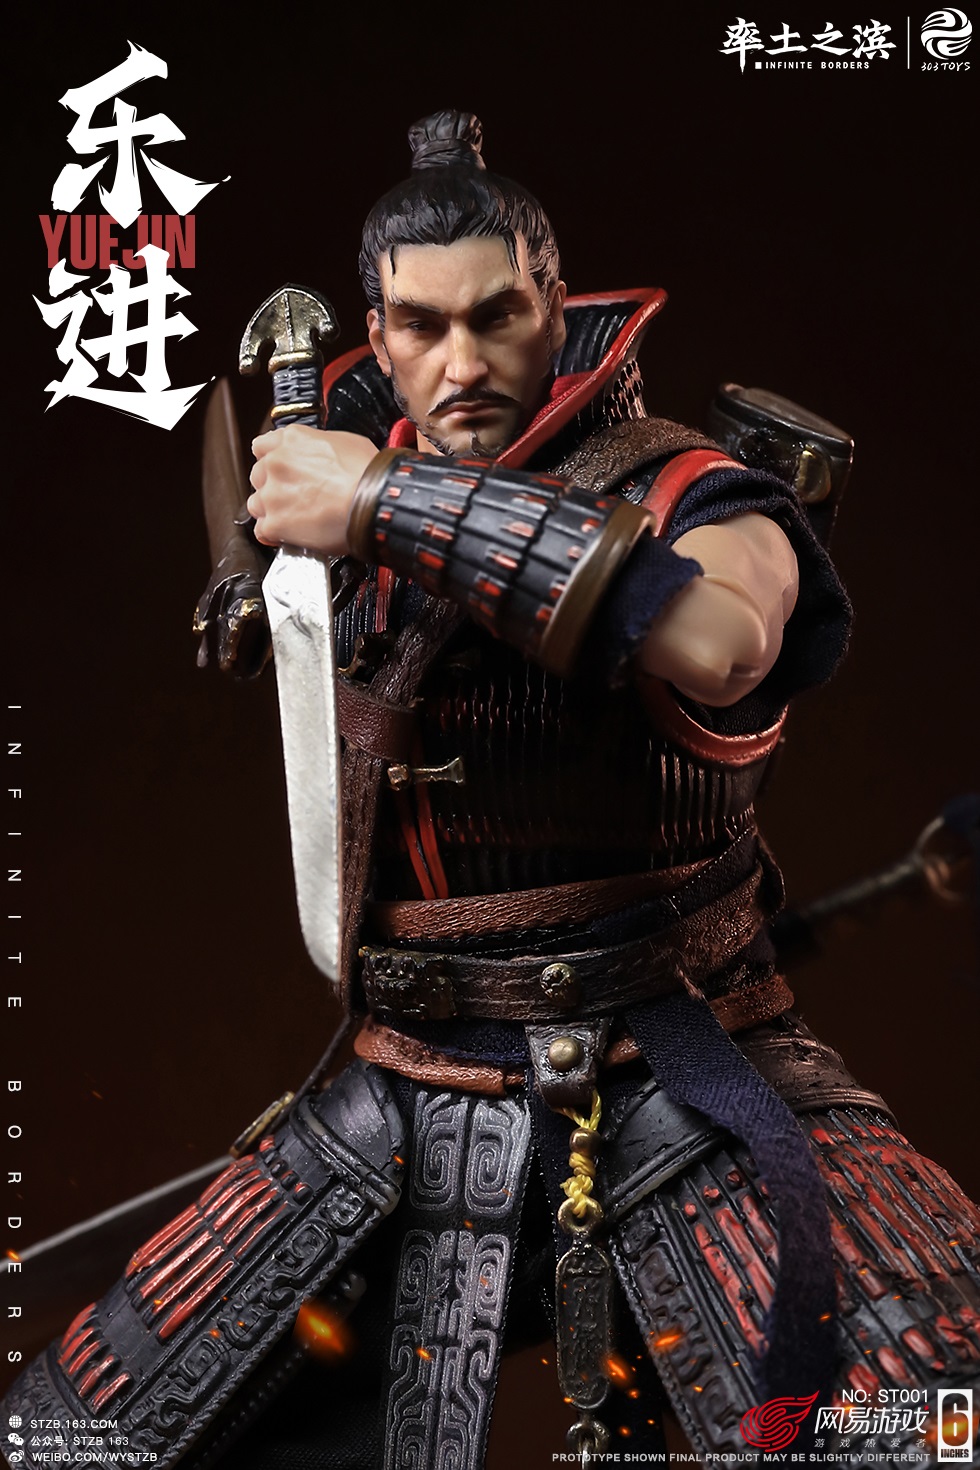 NEW PRODUCT: INFINITE BORDERS X 303TOYS 1/12 - The Five Sons of Elite Generals: Yue Jin ST001 07152